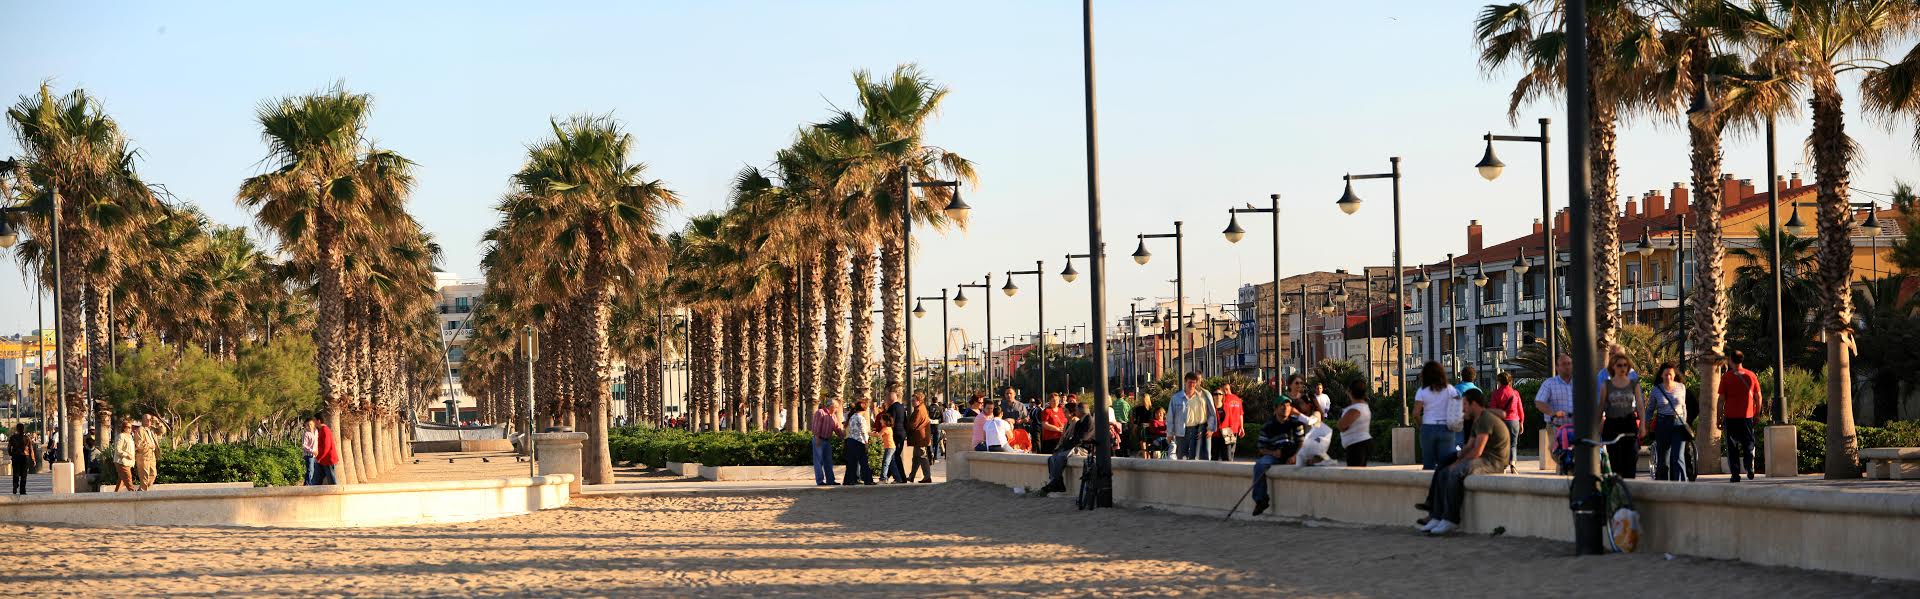 Valencia beach - Best free things to do in Valencia